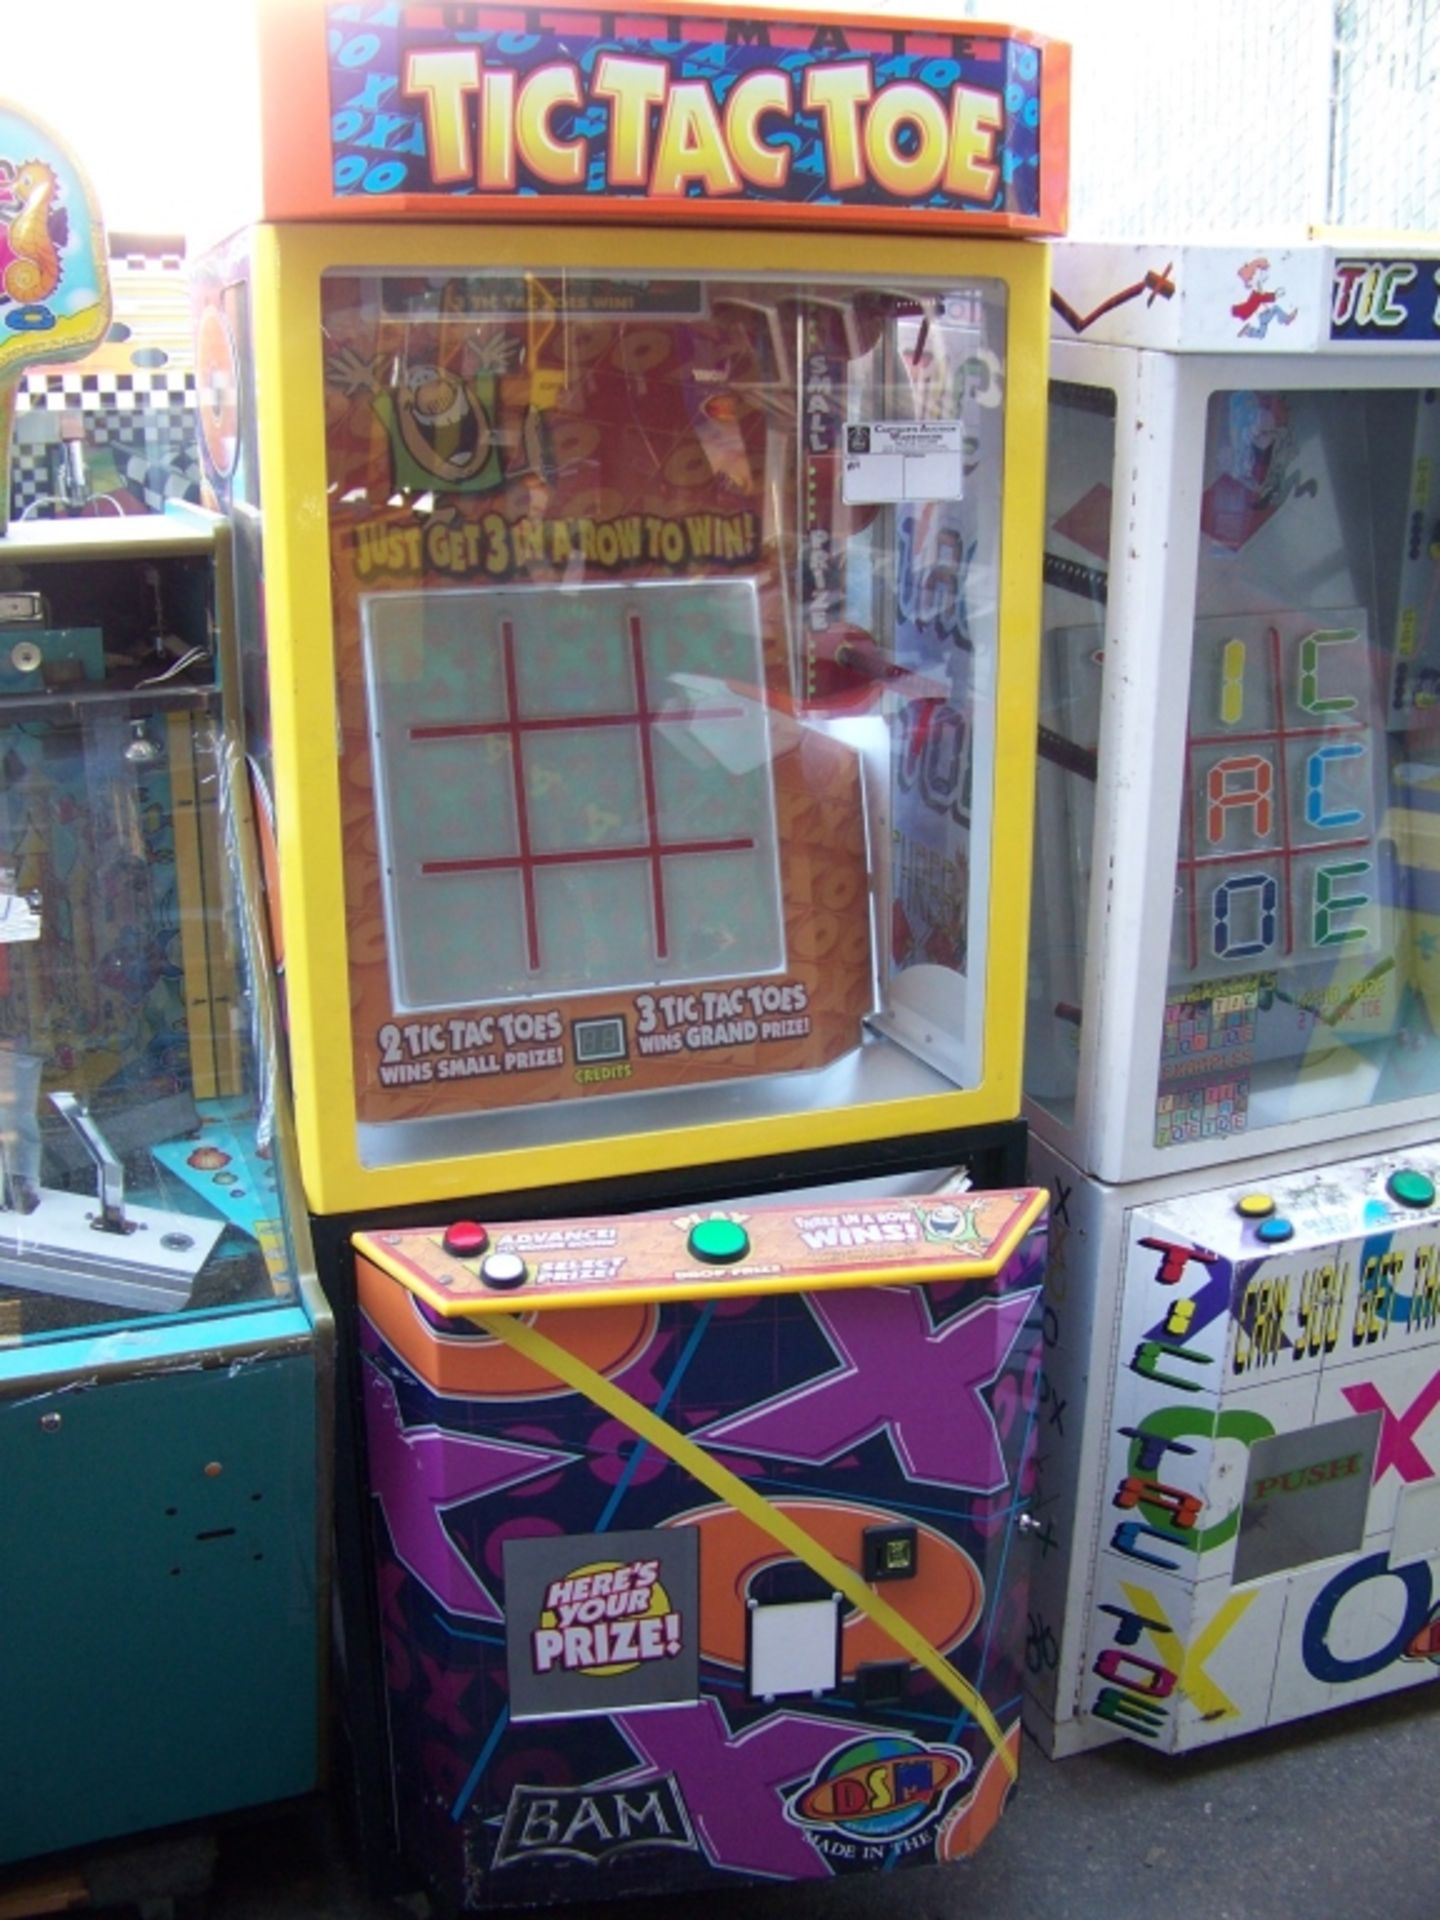 TIC TAC TOE PRIZE REDEMPTION GAME ORANGE CAB Item is in used condition. Evidence of wear and